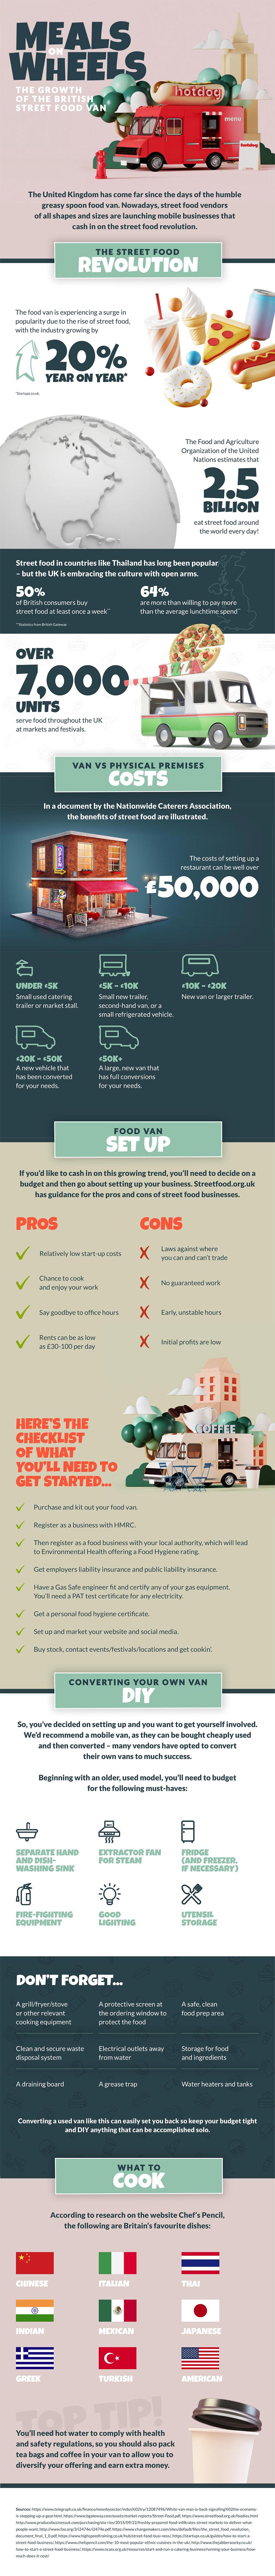 Business is booming infographic